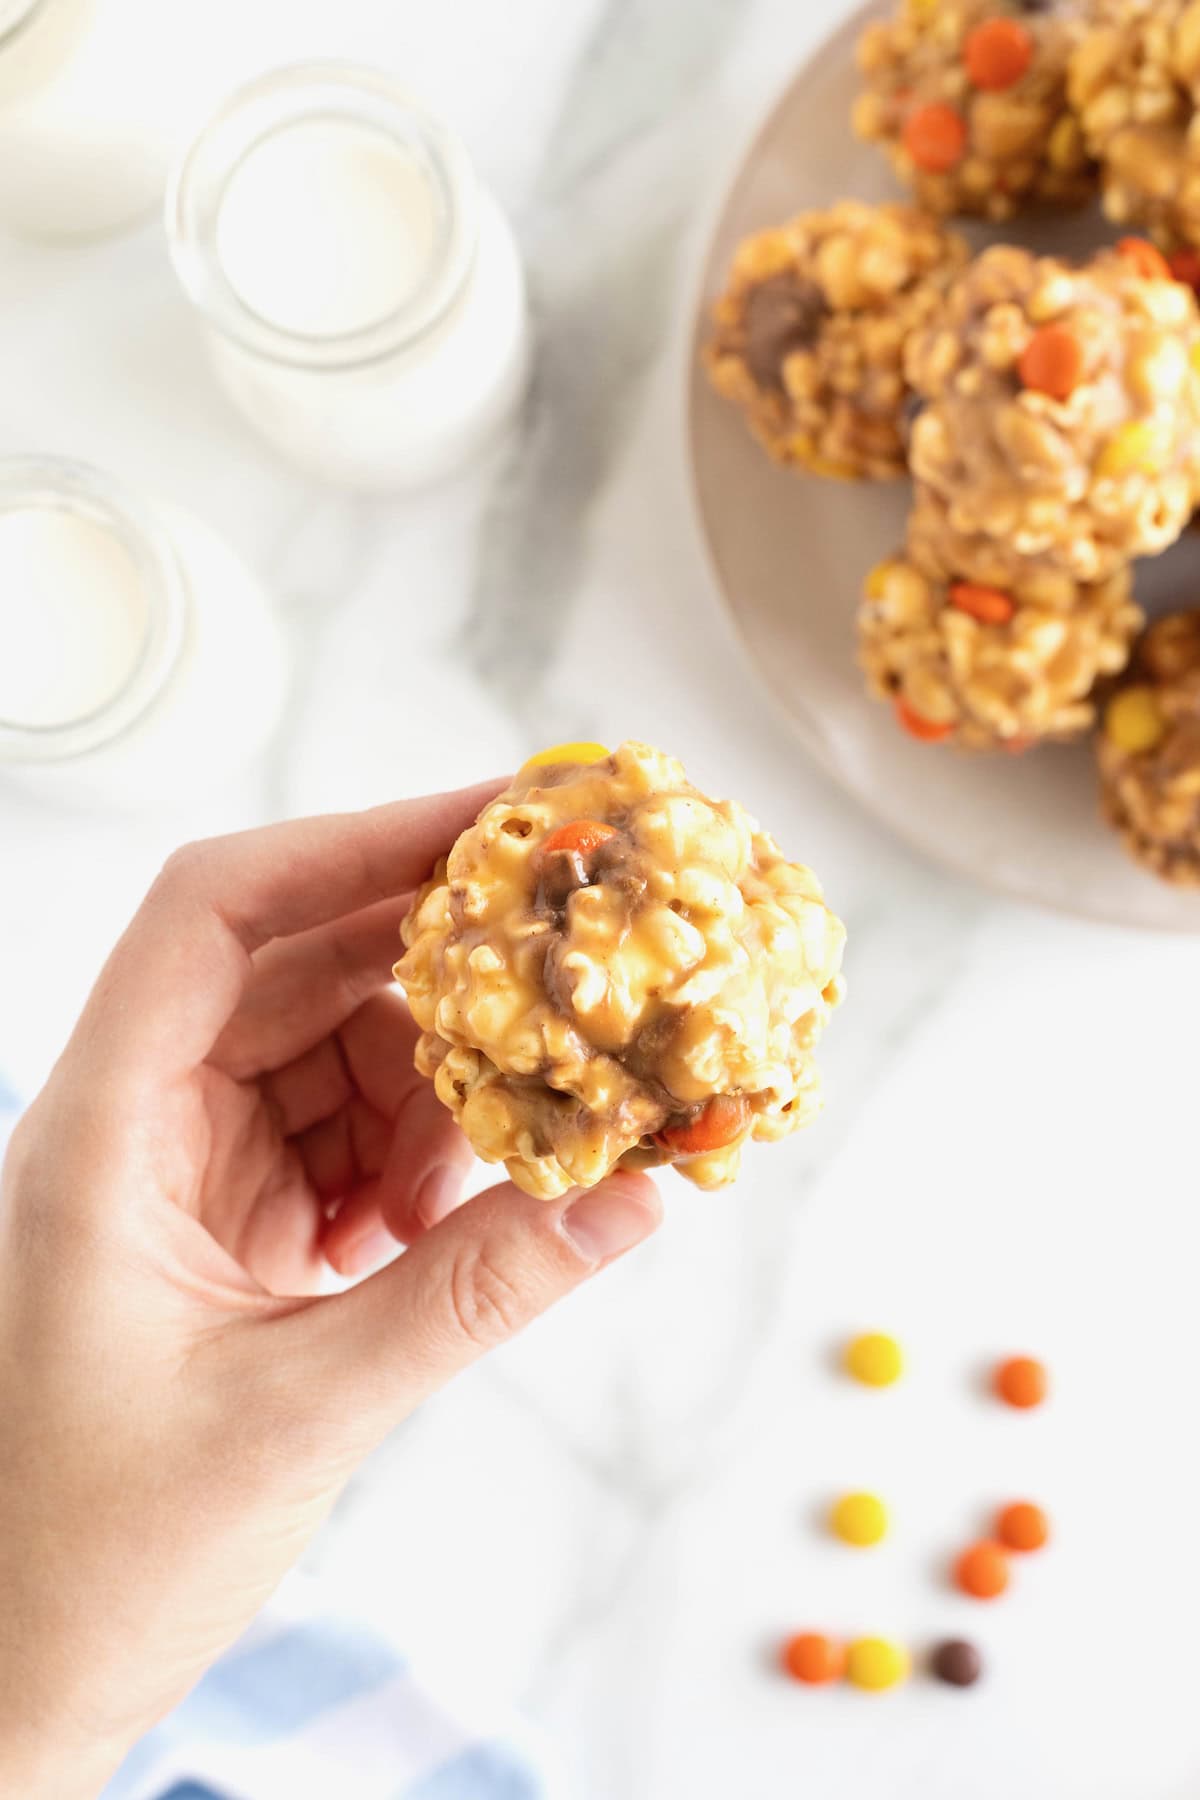 A hand holding a peanut butter popcorn ball in from of a large white serving plate of popcorn balls.